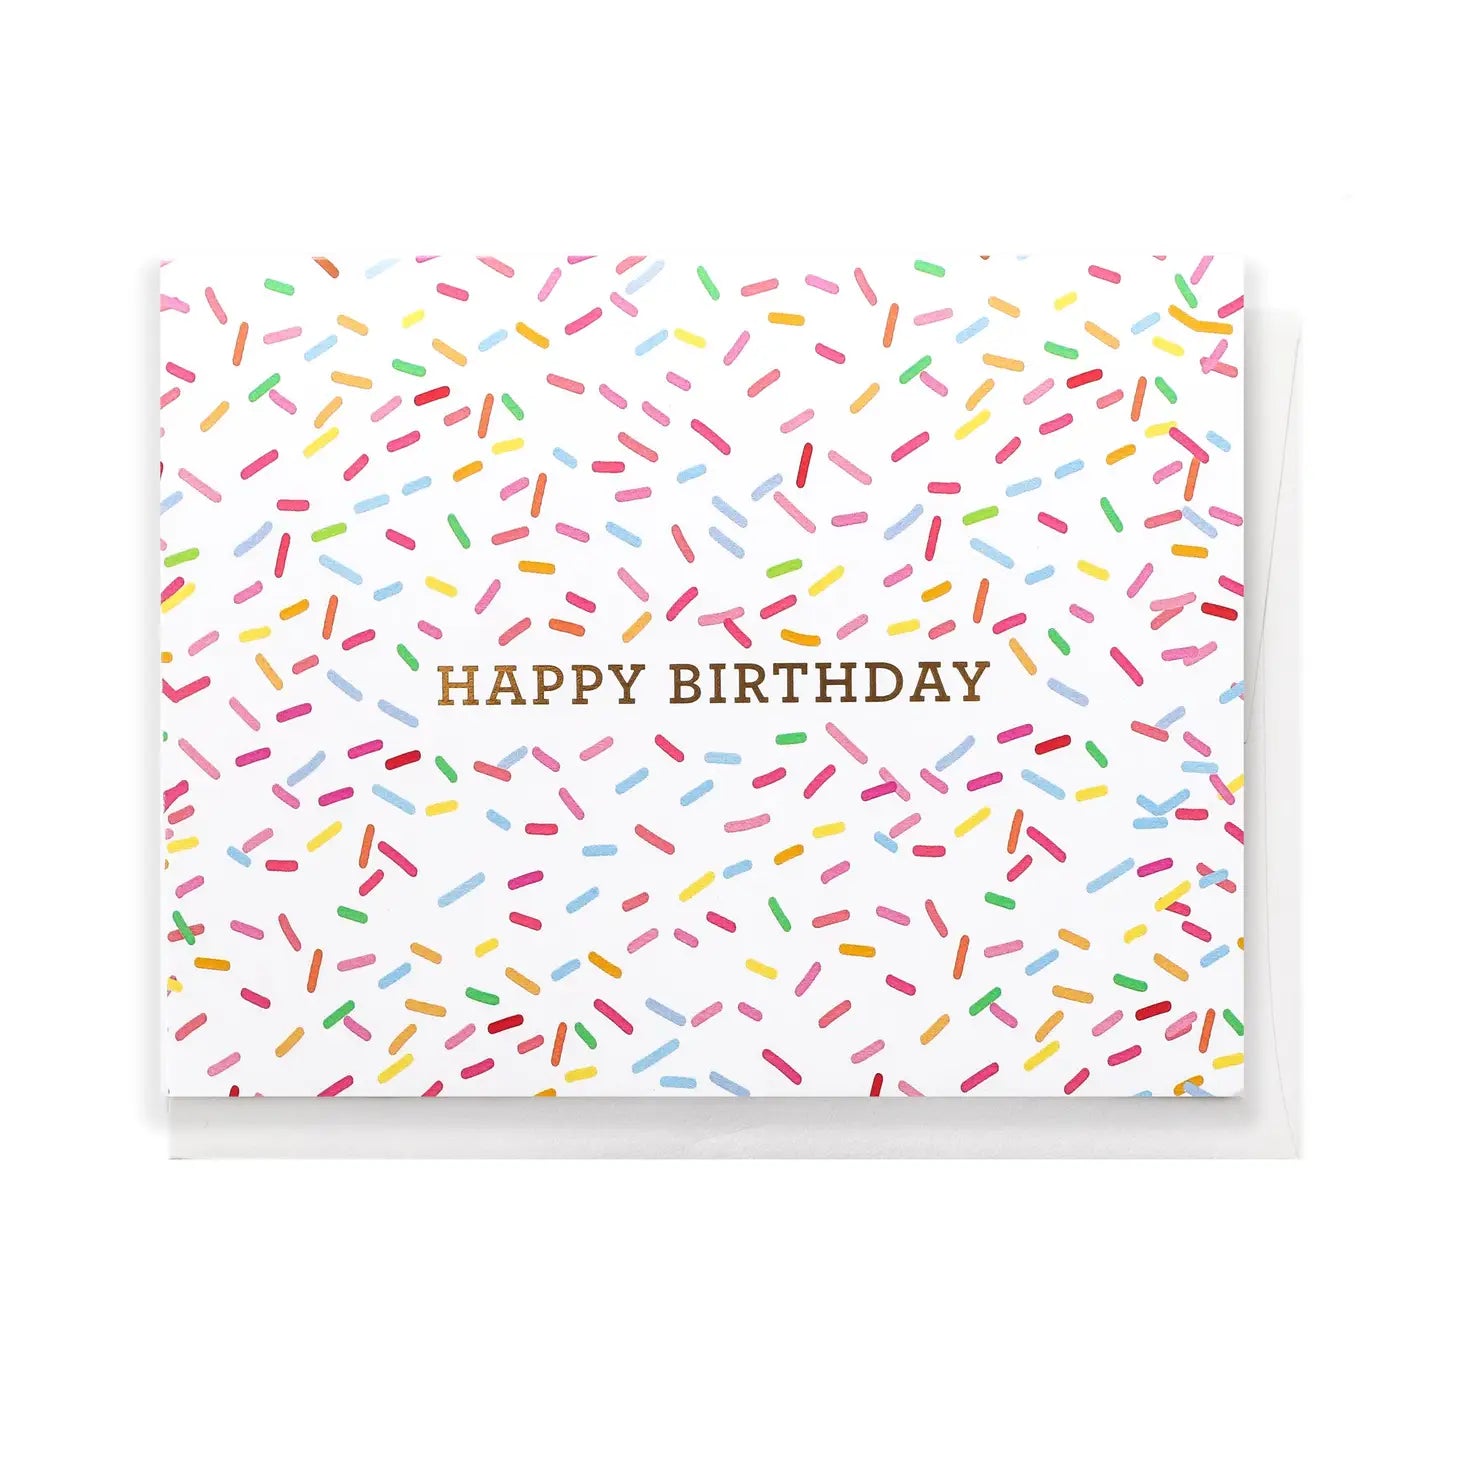 Penny Paper Co Greeting Card - Sprinkles Birthday